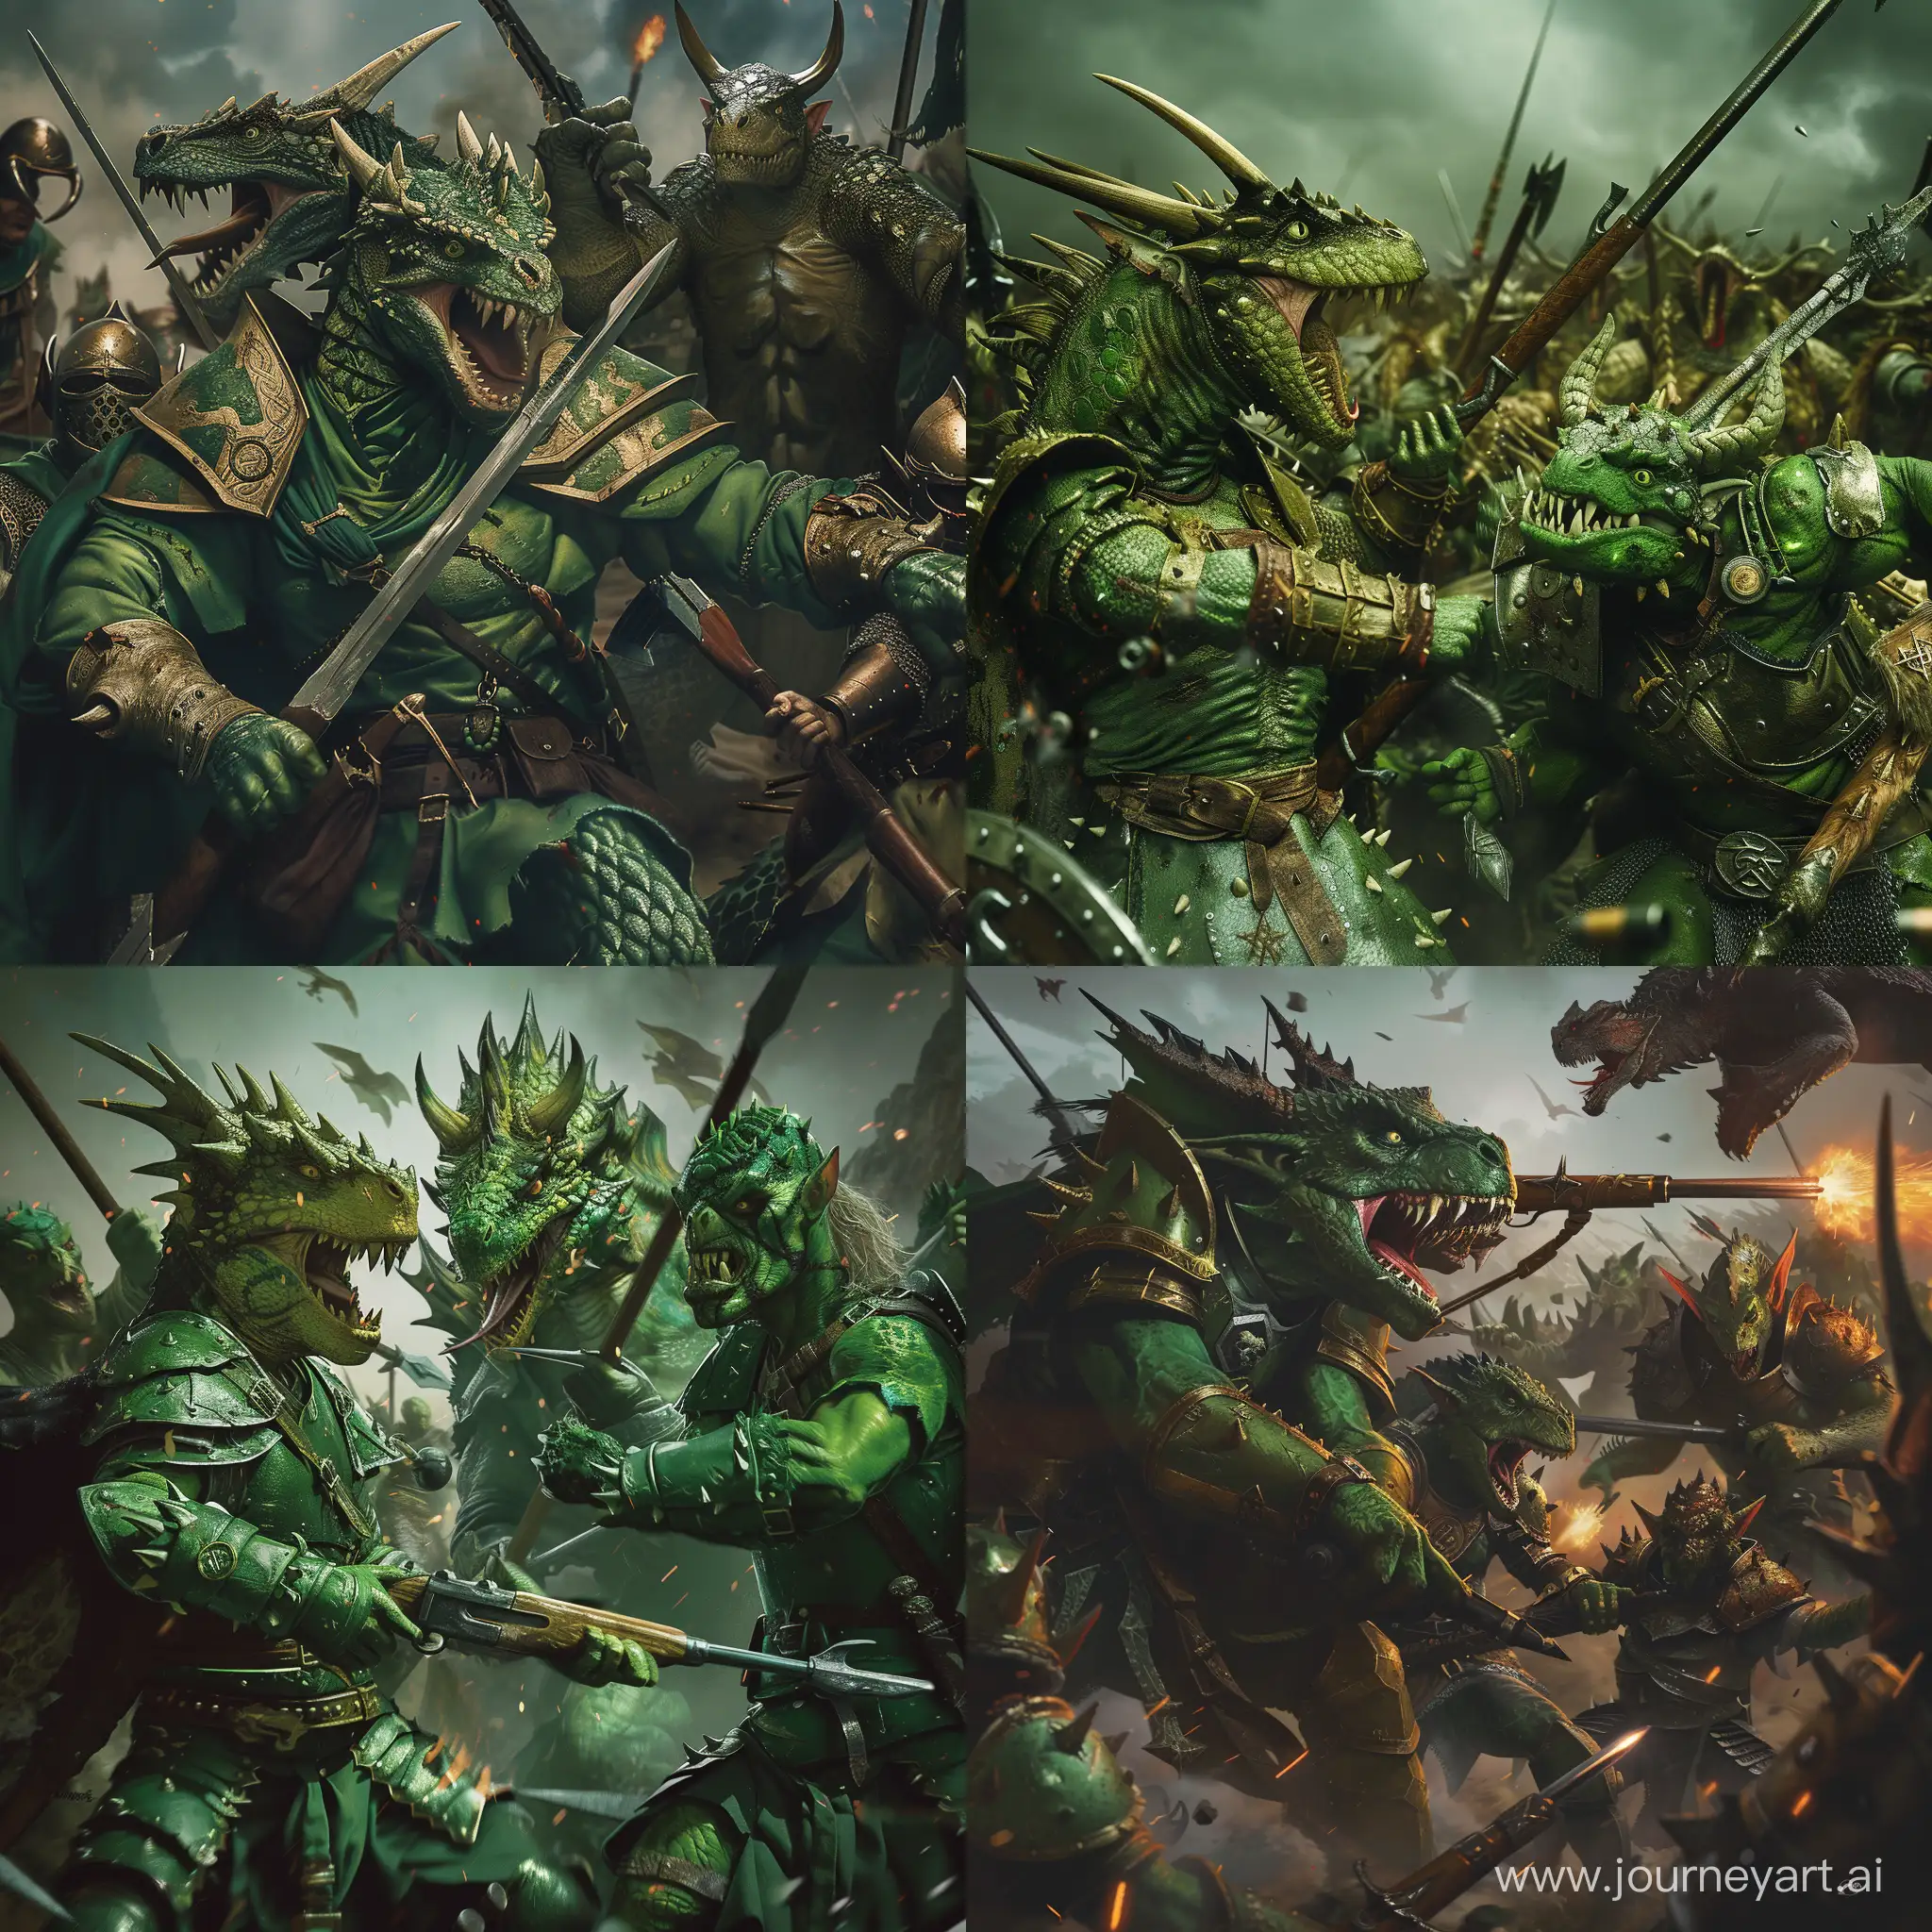 Epic battle beetween green orcs and lizard warriors with dragon head, armed green armor, medieval riffle weapons, realistic, darkenss, the great battle, 4k, full hd